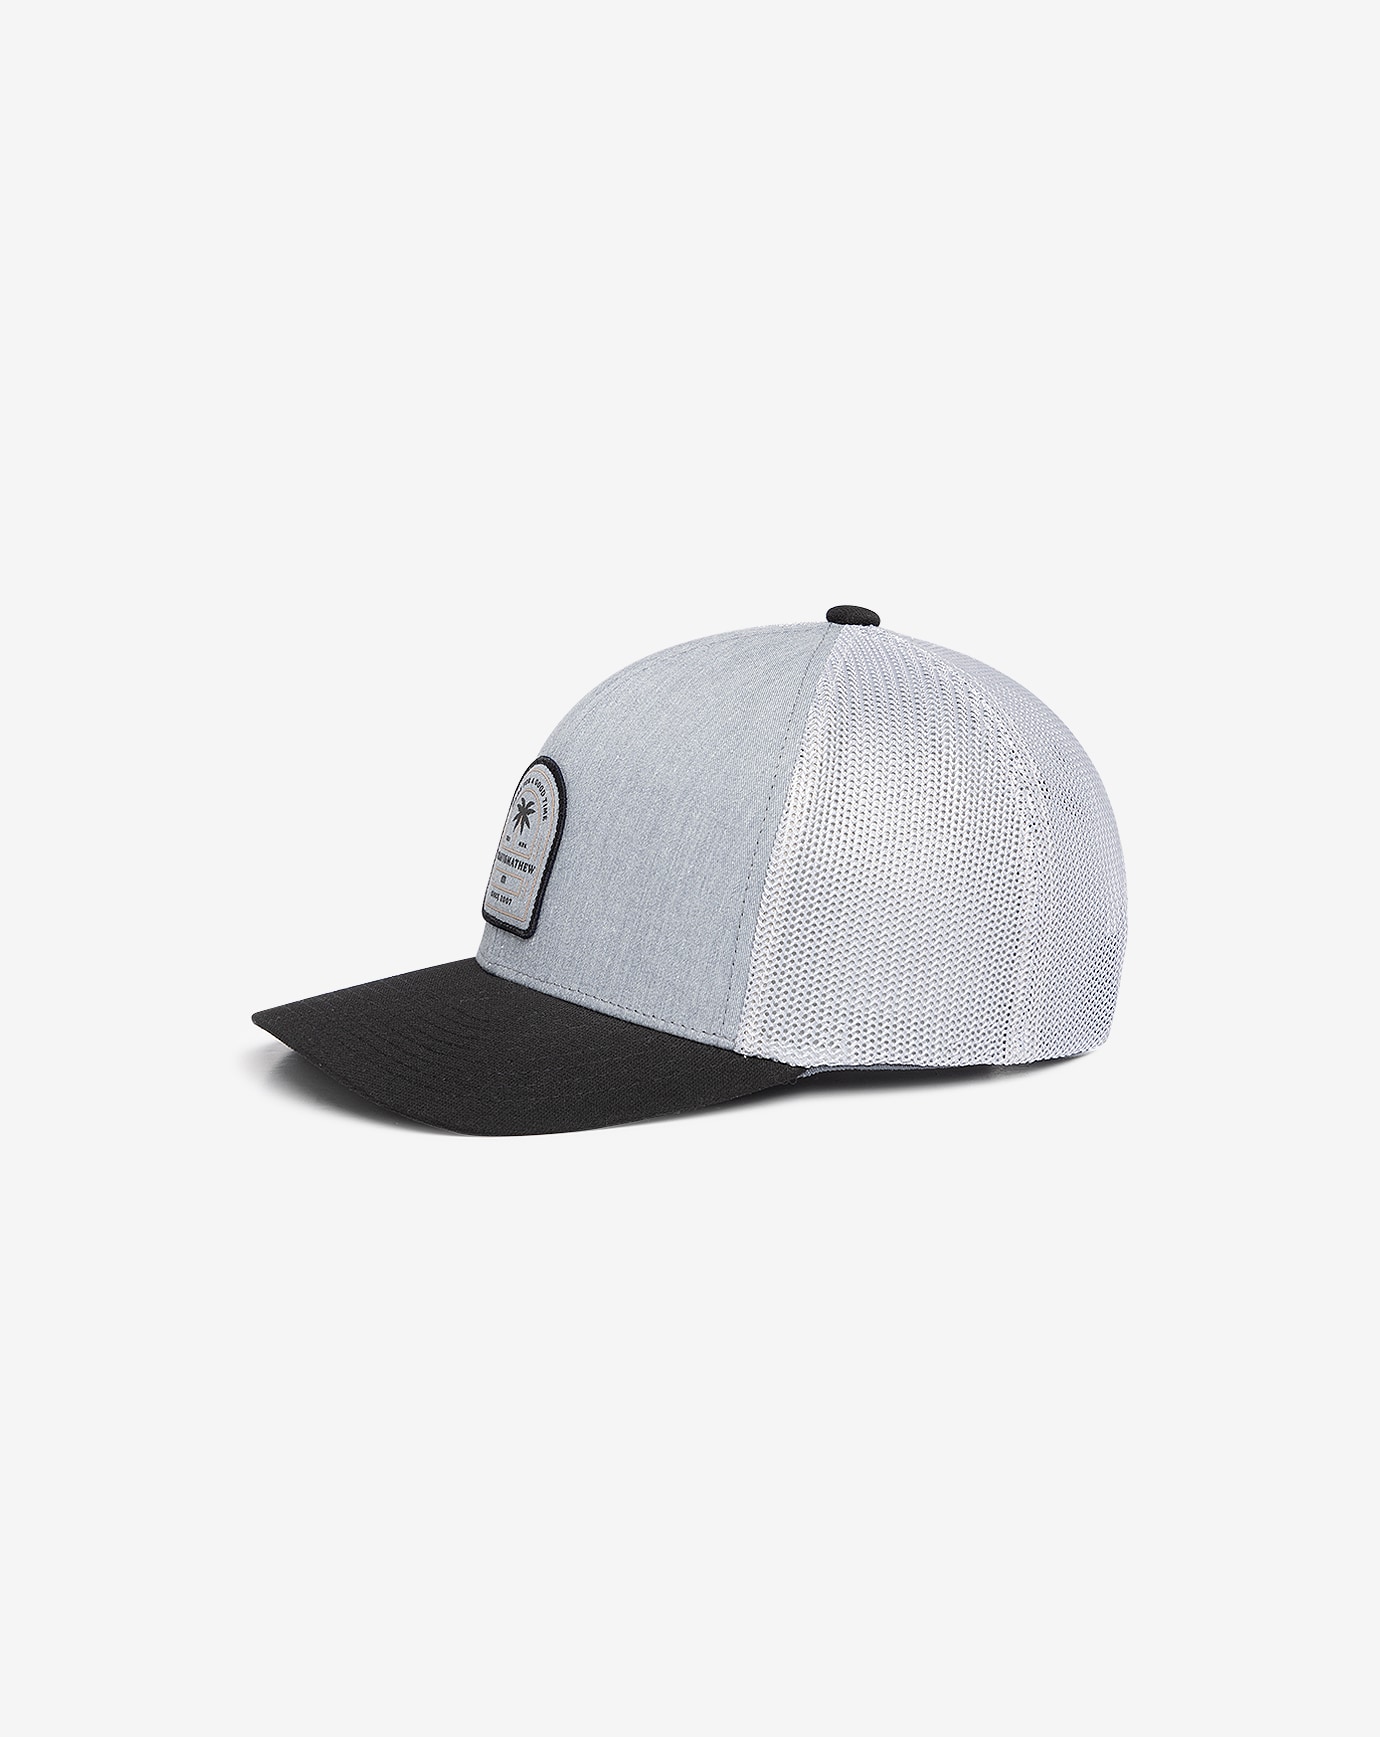 EXPENSE REPORT SNAPBACK HAT Image 2